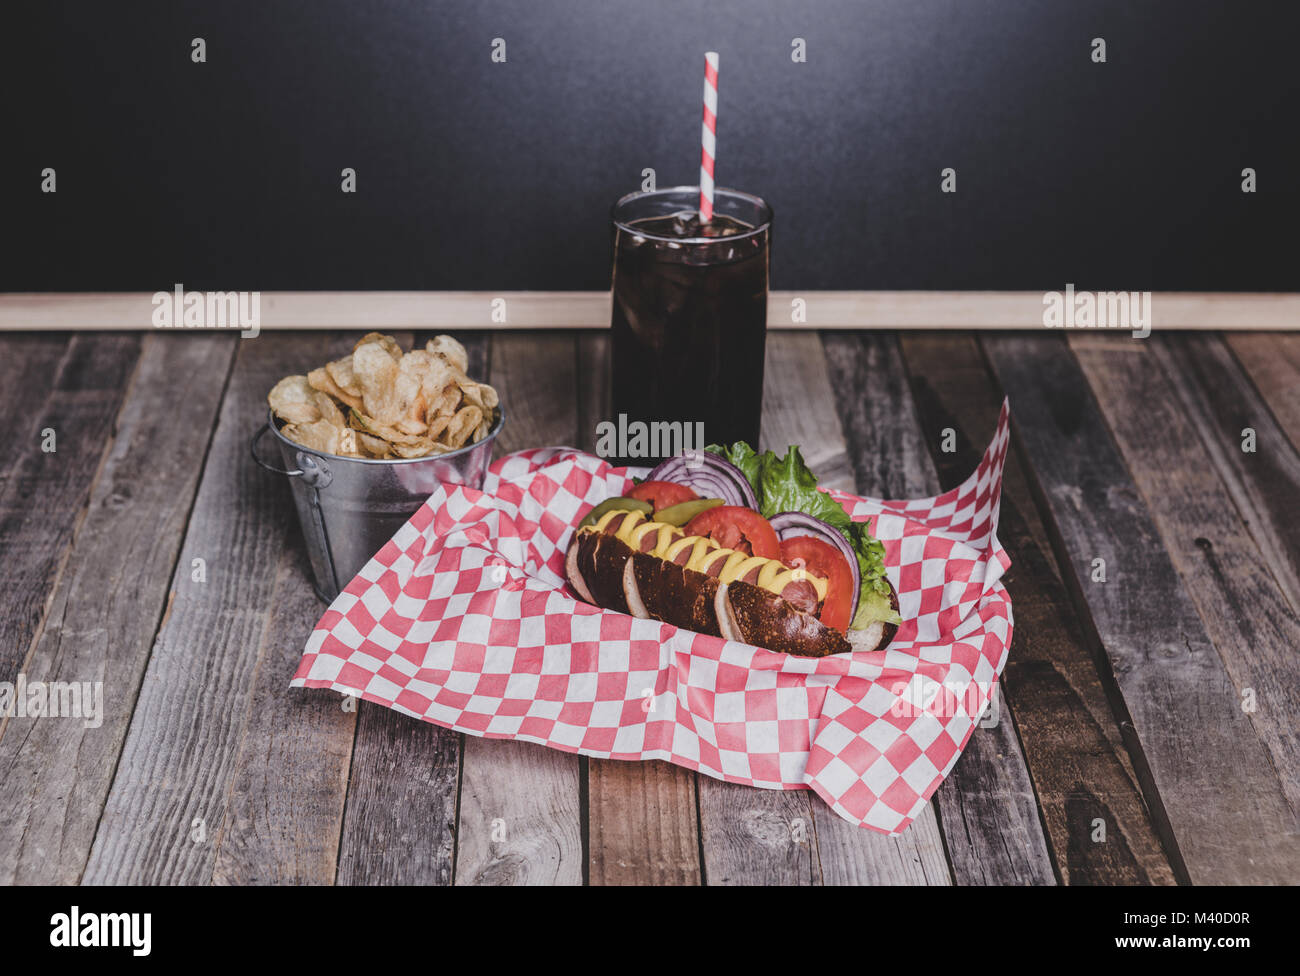 Gourmet hot dog with chips and drink in a basket with gingham napkin. Tabletop, front view. Stock Photo